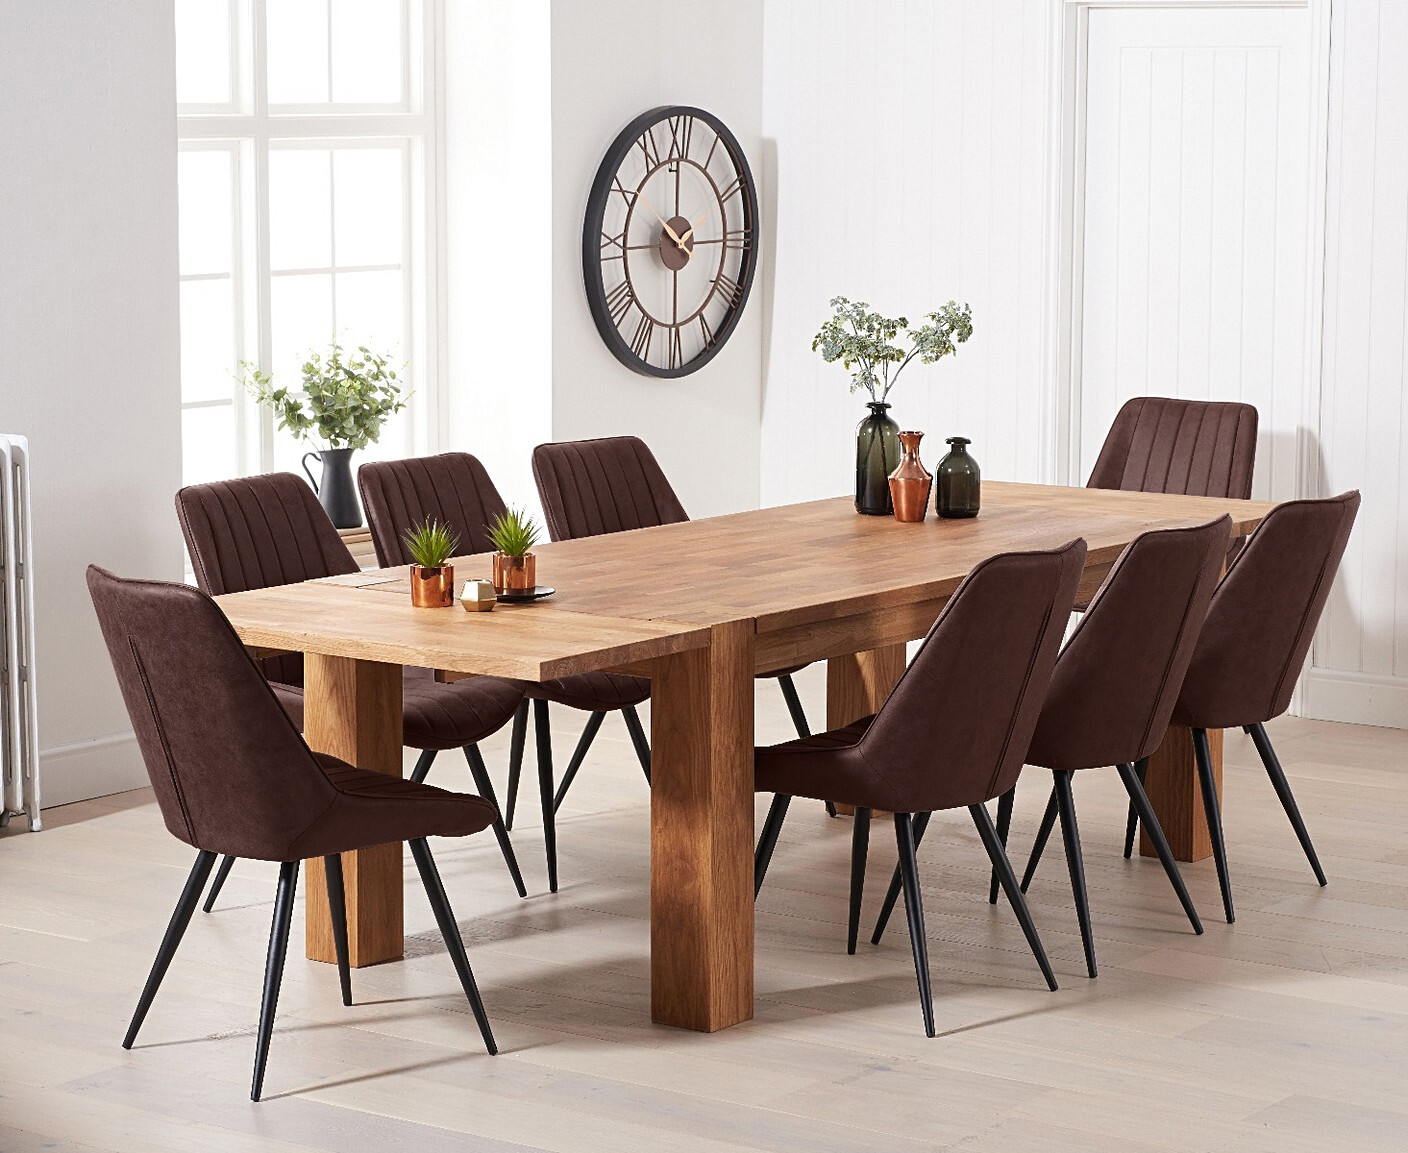 Photo 3 of Sheringham 200cm solid oak dining table with 6 brown brody chairs with sheringham oak extensions -pair-